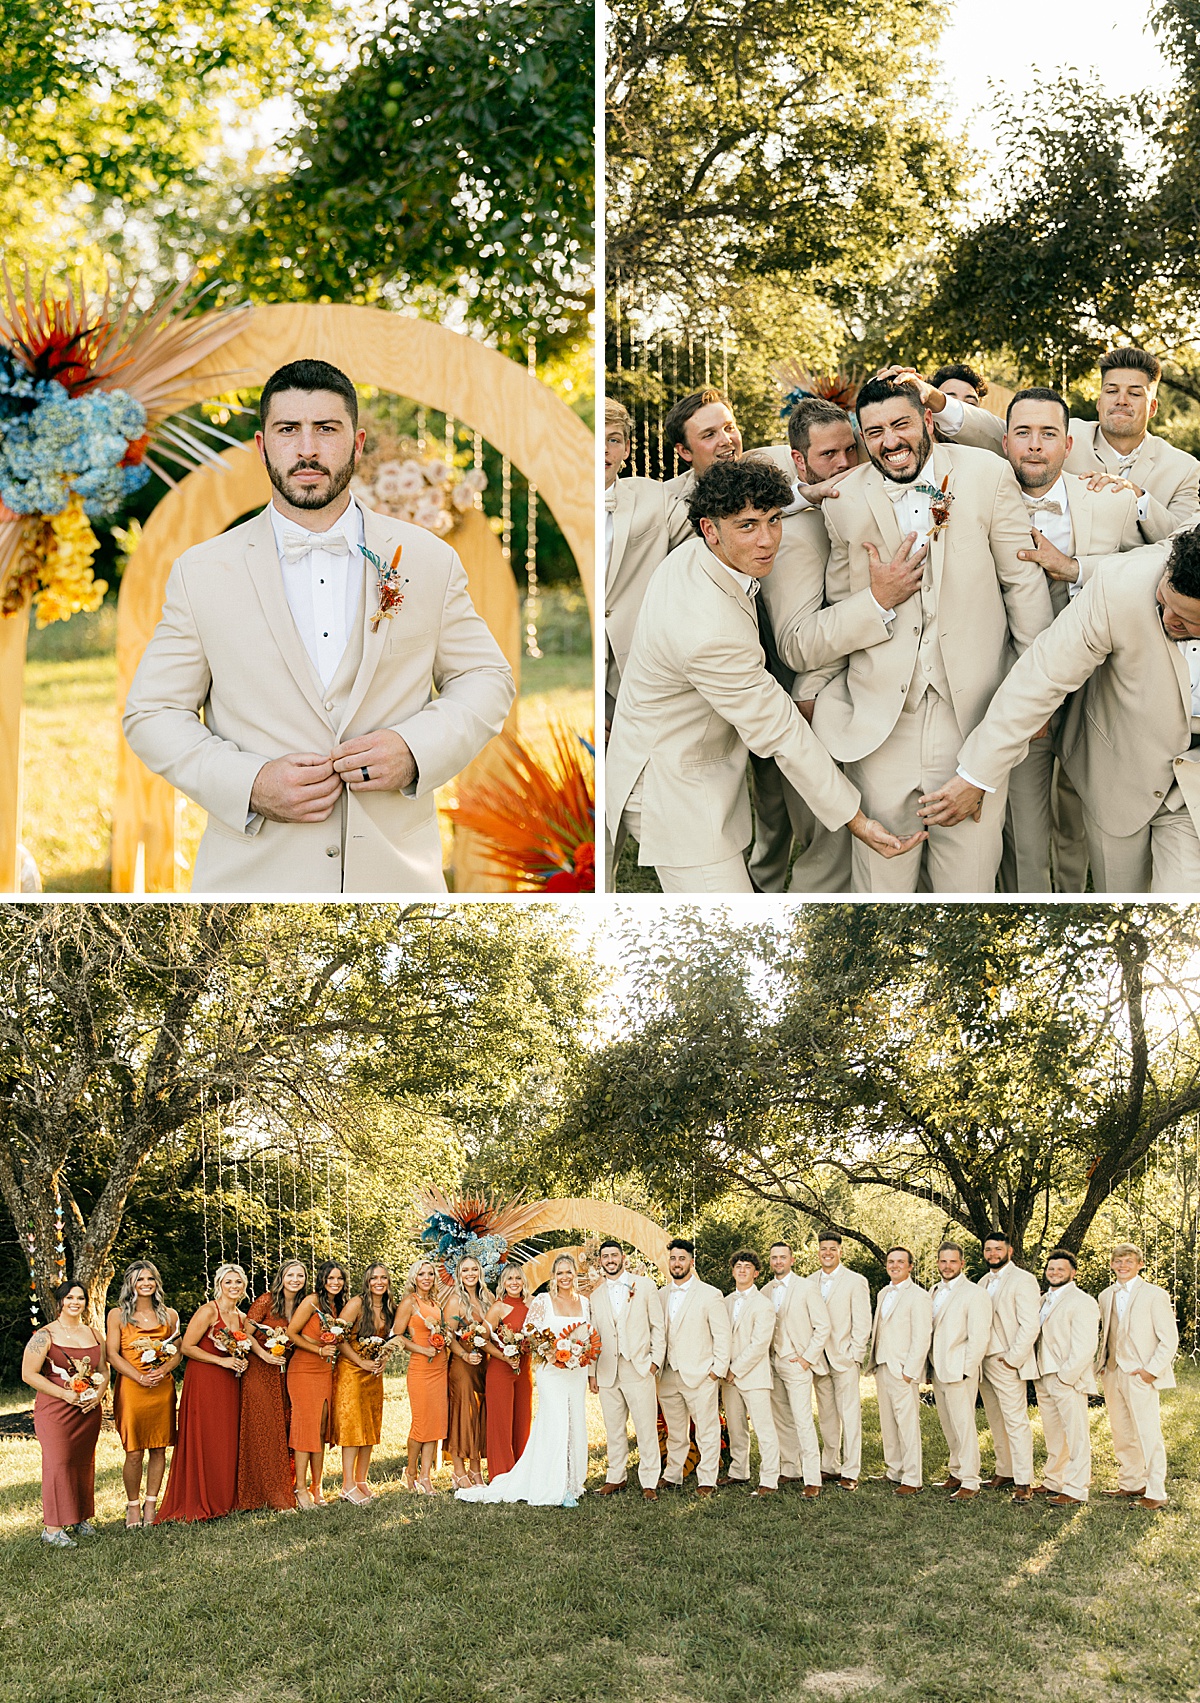 Tan groom and groomsmen suits and mismatched orange bridesmaid dresses.